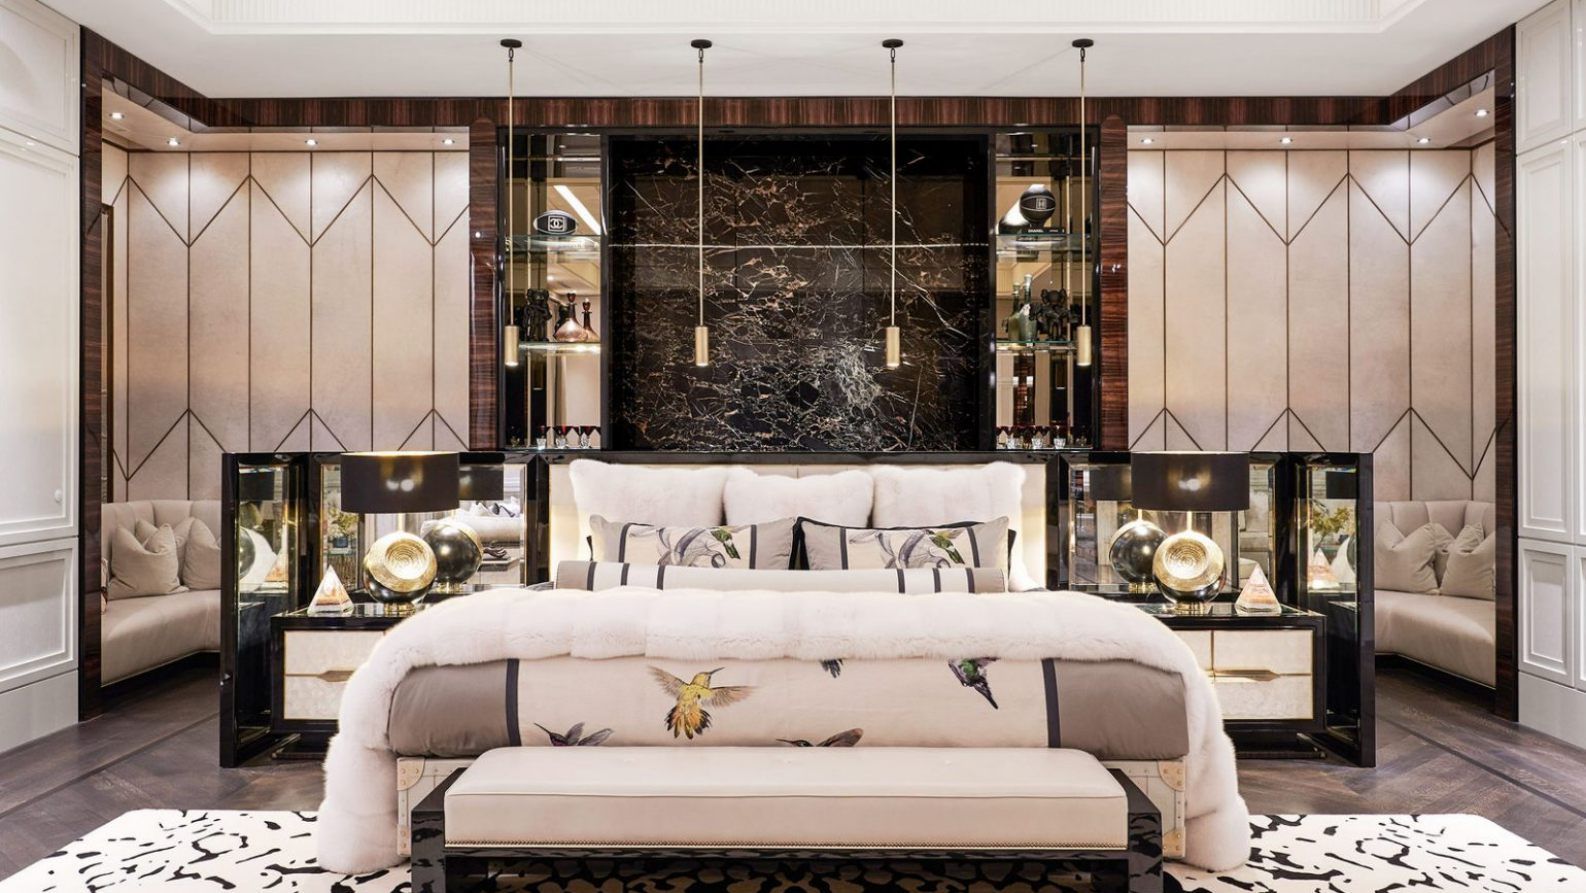 Drake owns a Ferris Rafauli-designed bed worth over RM1.6 million — is it worth it?